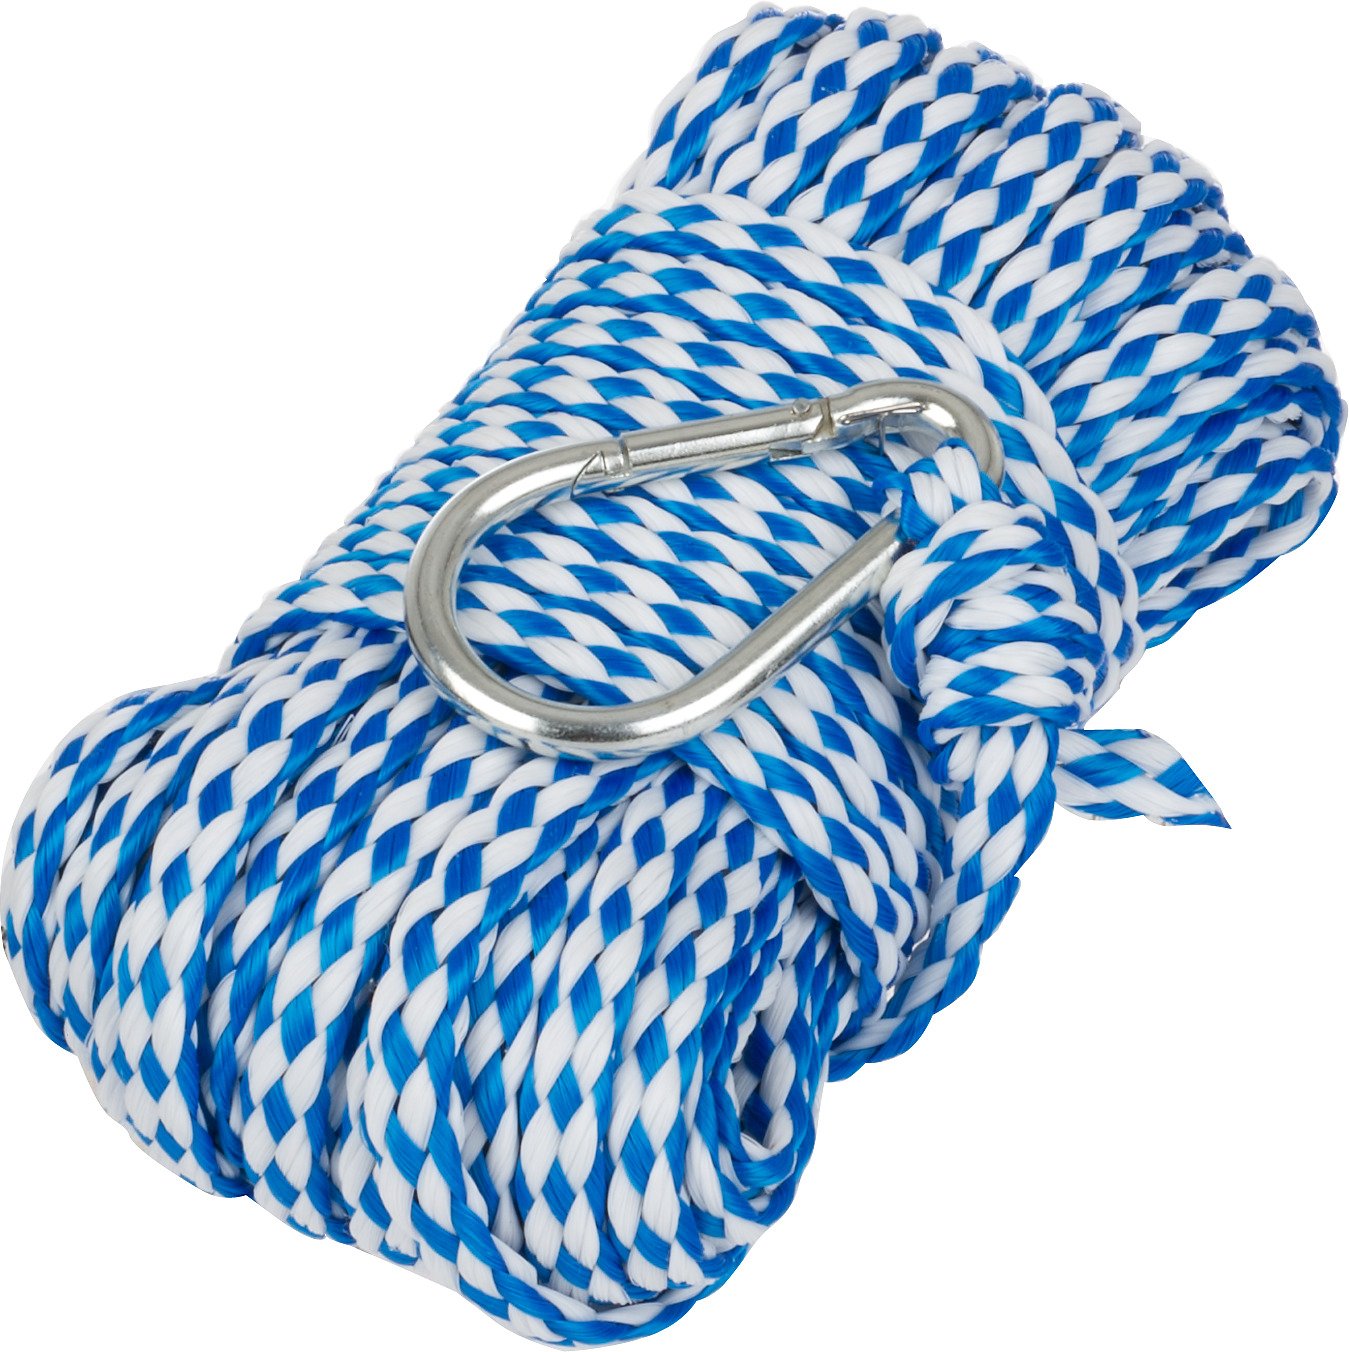 100ft 1/2 inch Double Braided Polyester Rope High Strengh Nylon Core Rope  for Anchor, Tree Work, Cargo, Pulling, Sailing